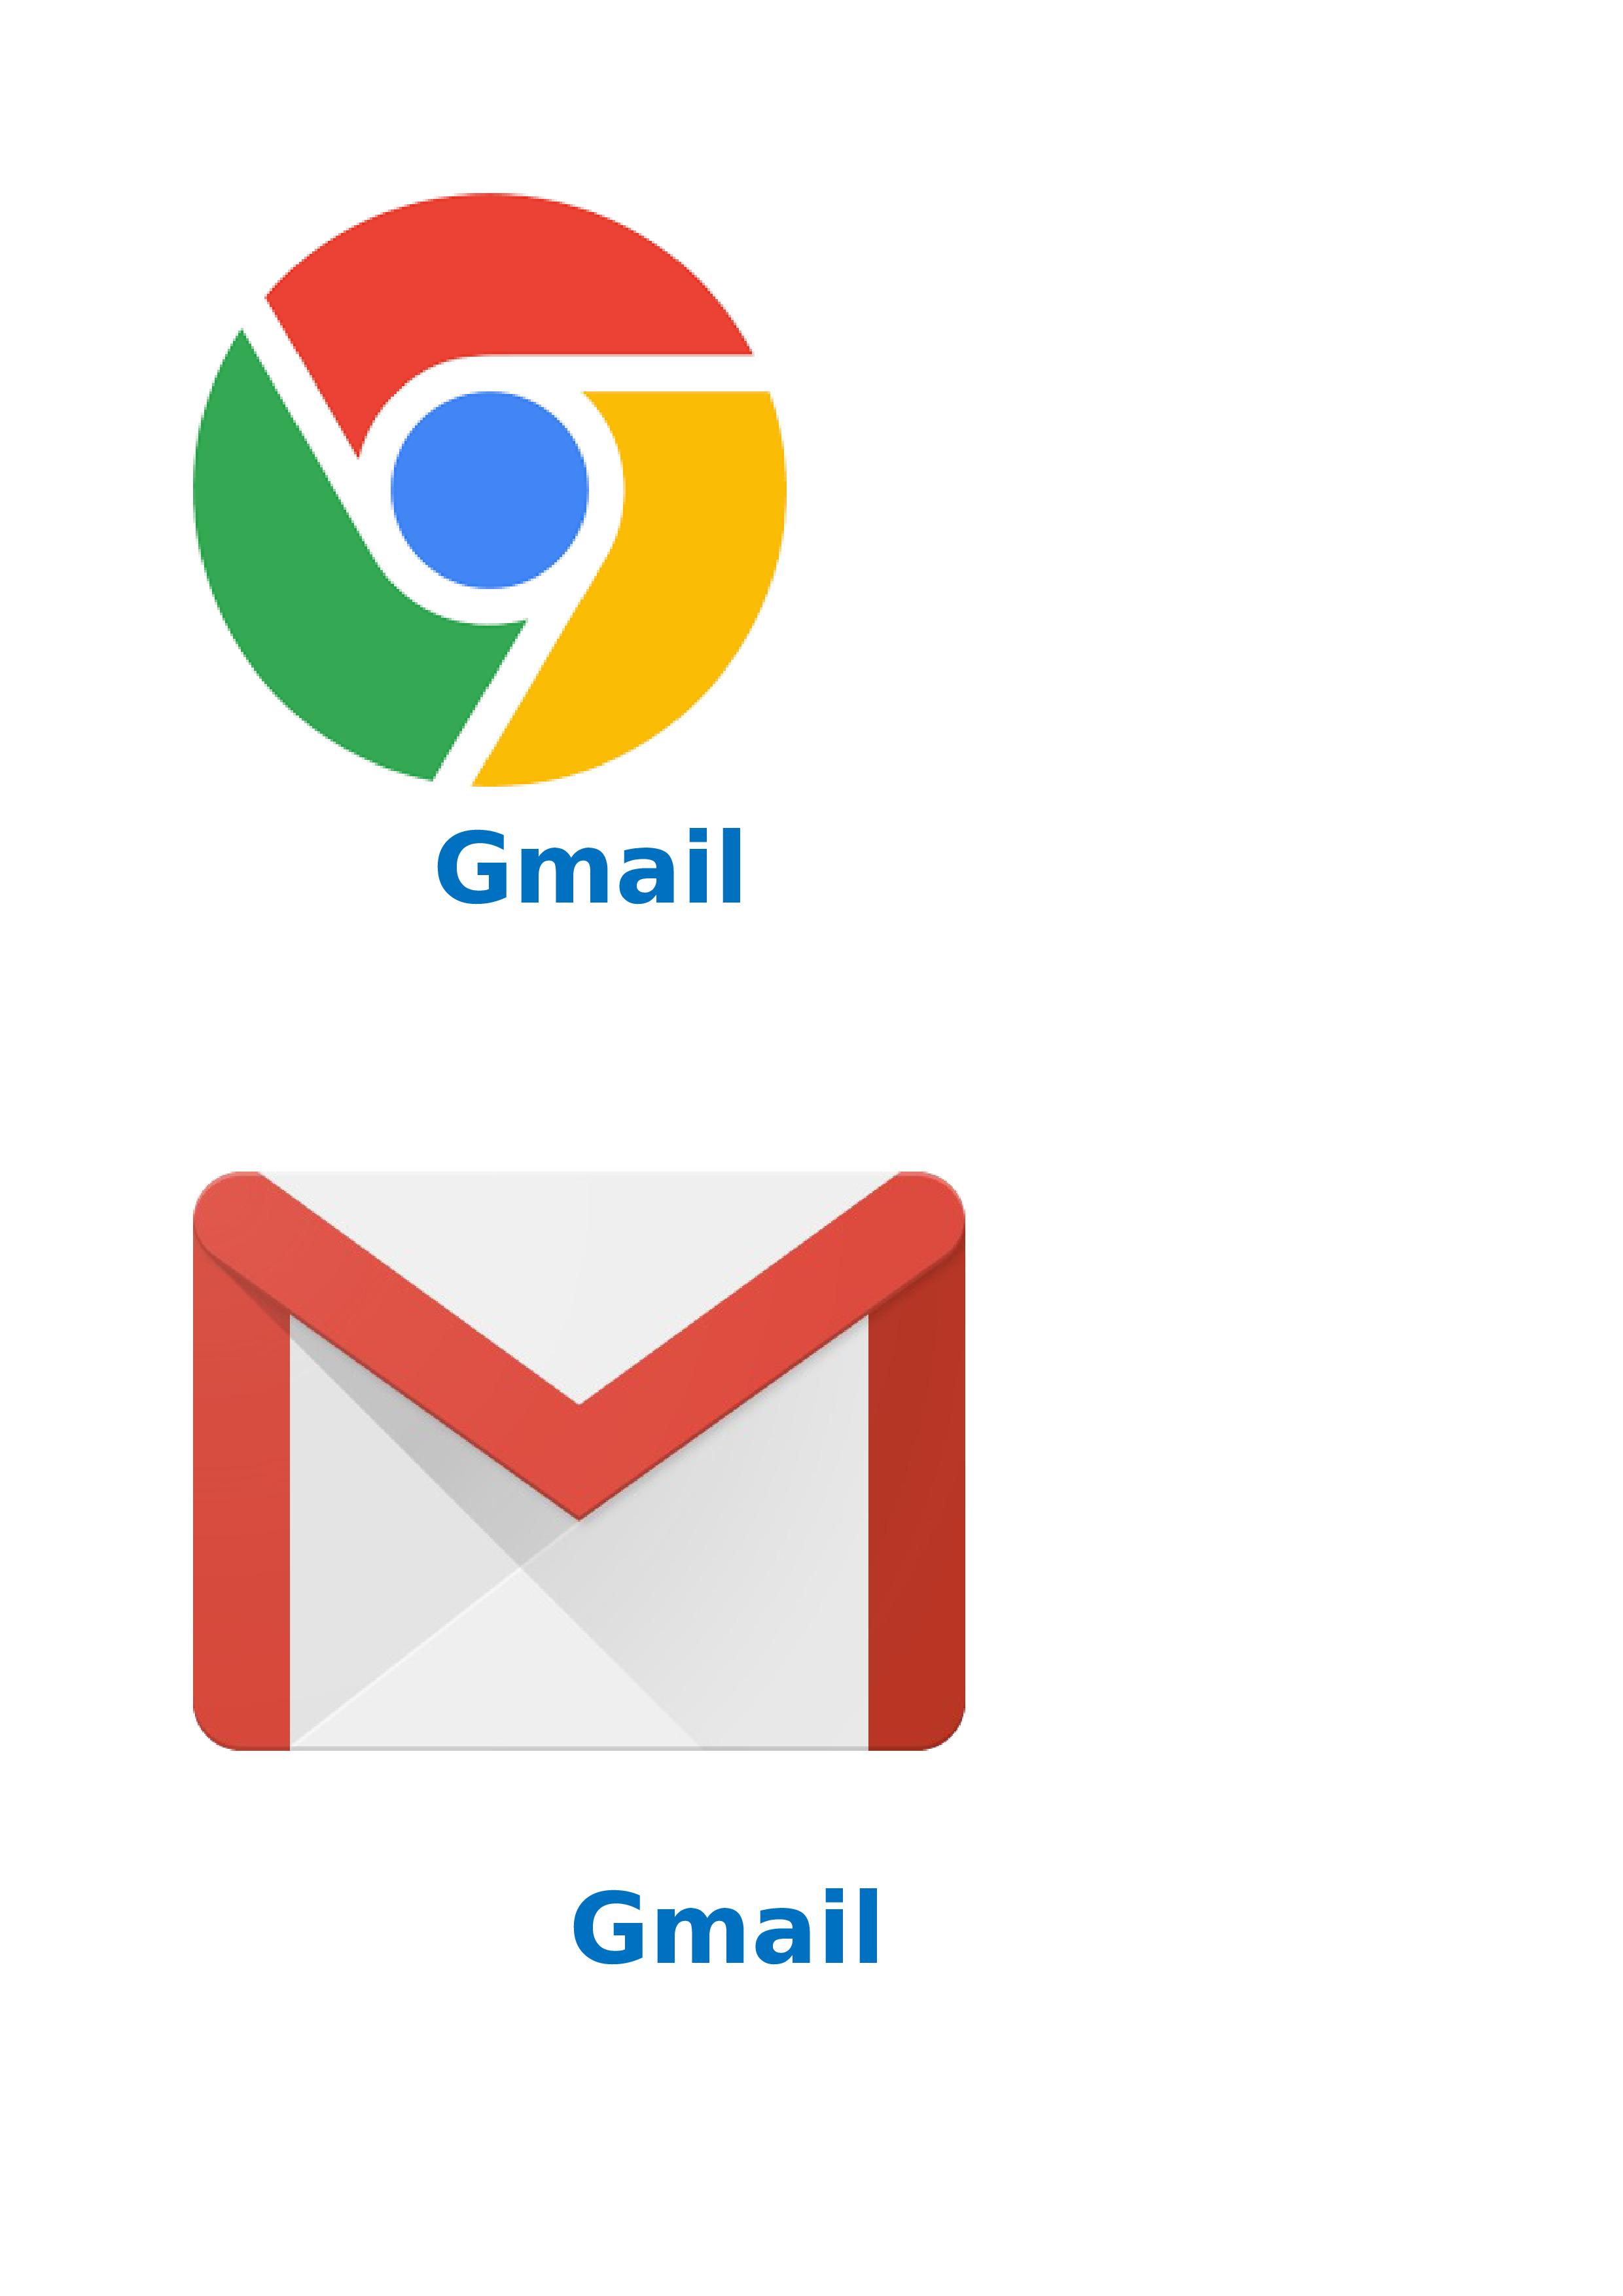 How to put gmail icon on desktop